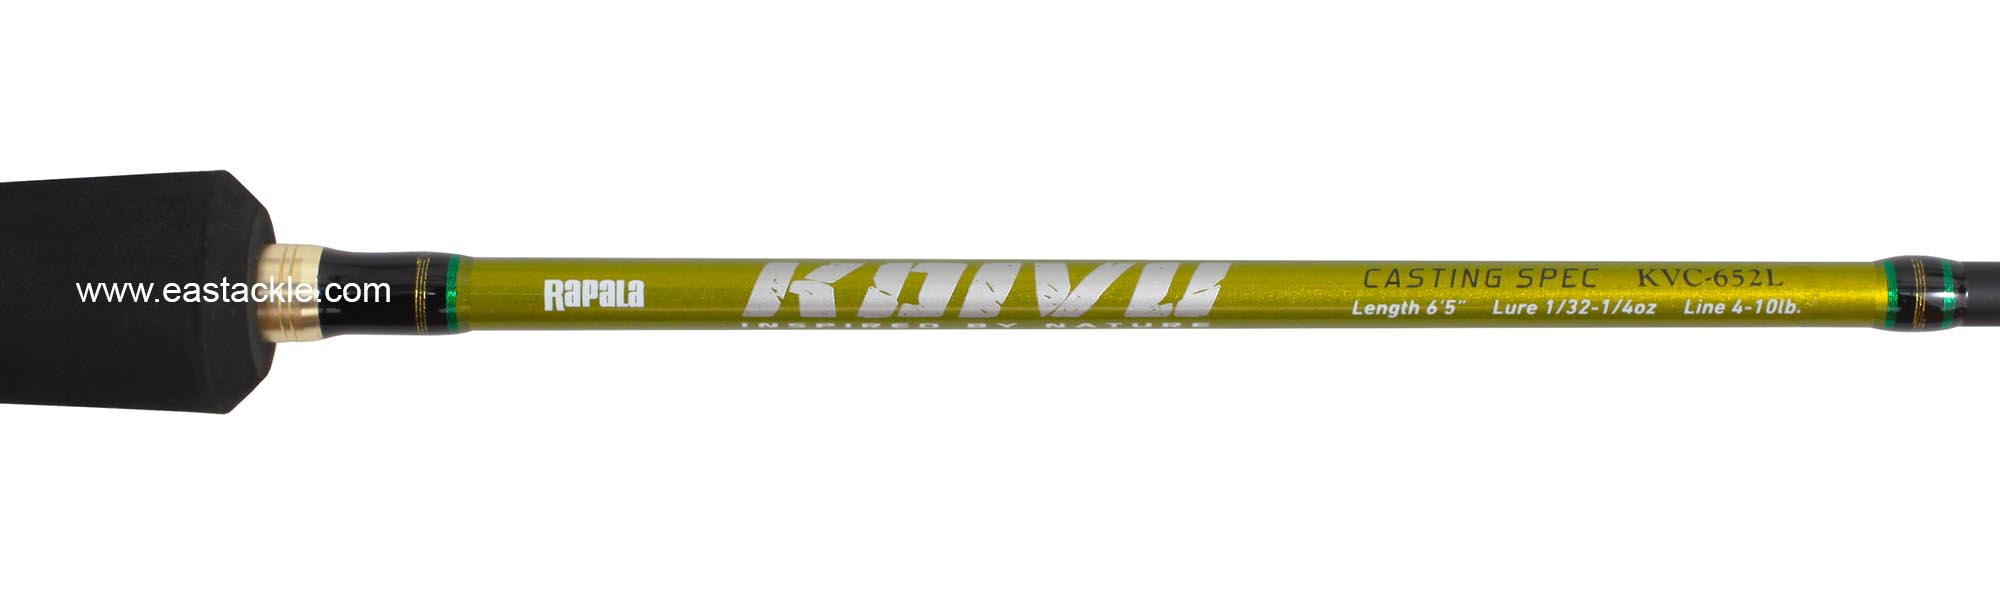 Rapala - Koivu - KVC652L - Bait Casting Rod - Blank Specifications (Top View) | Eastackle